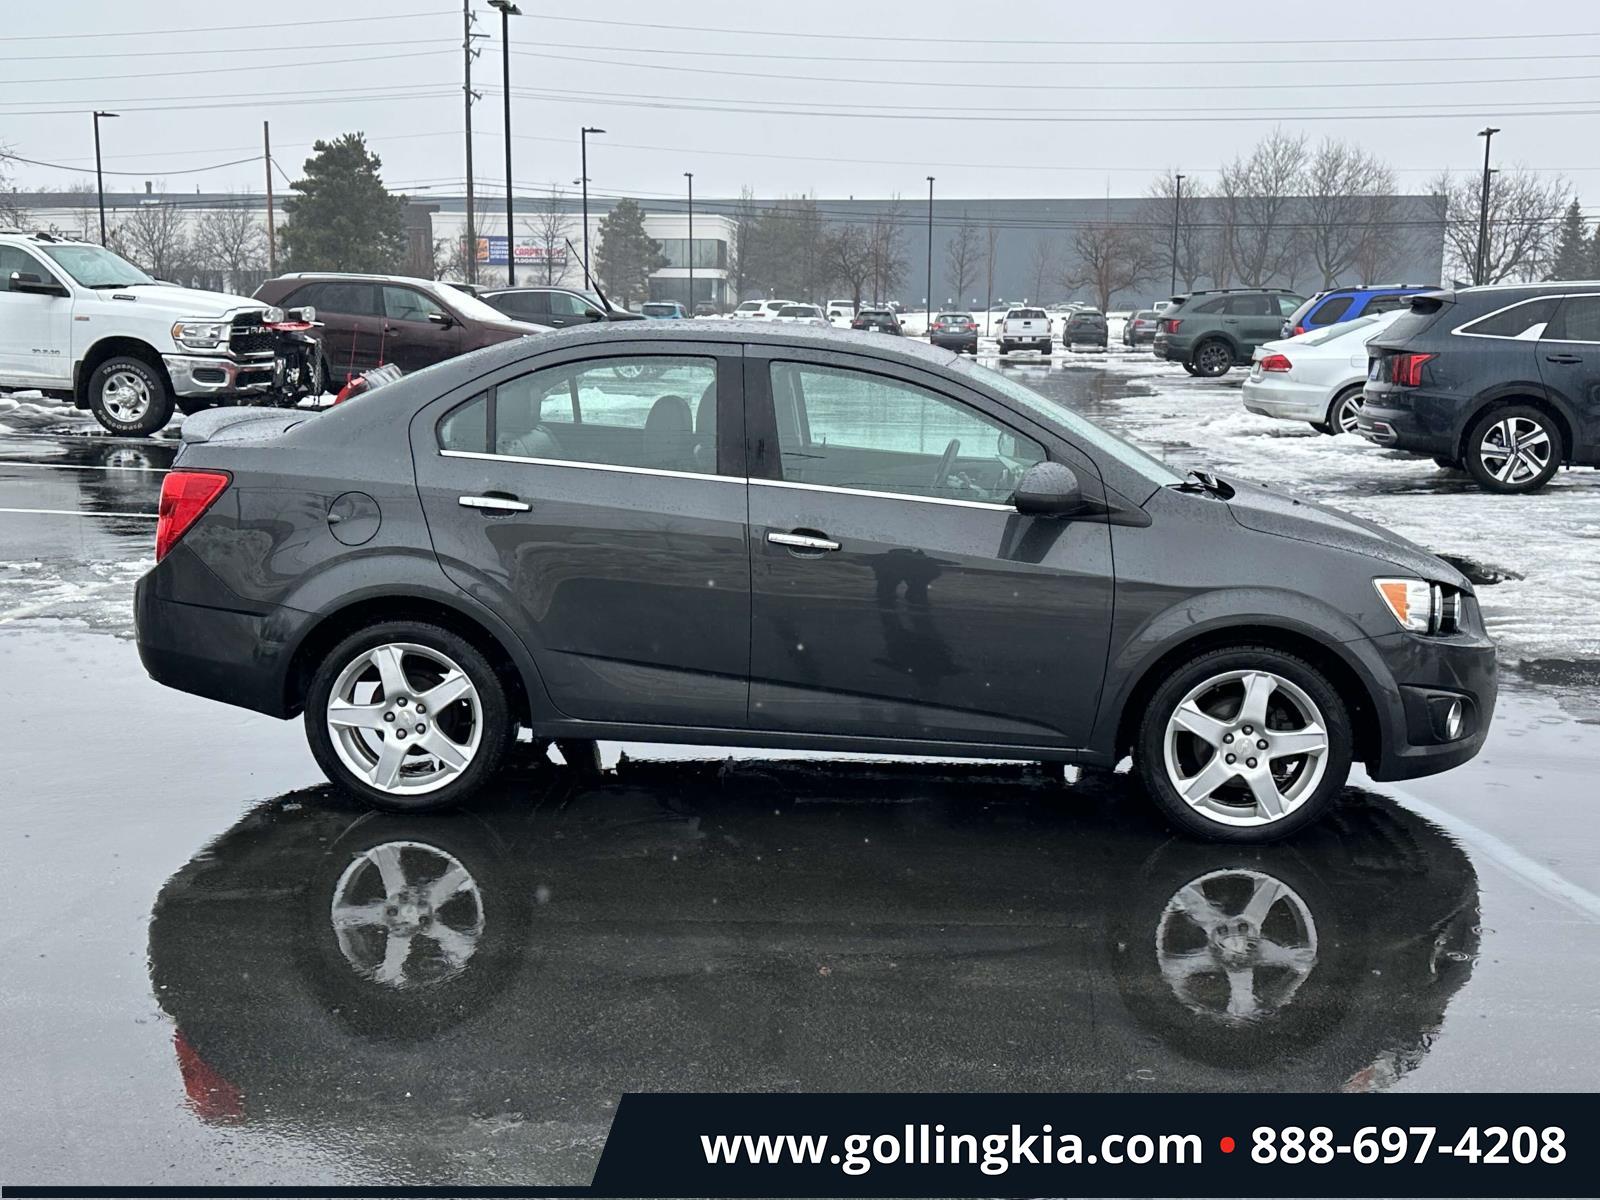 Used 2014 Chevrolet Sonic LTZ with VIN 1G1JE5SB9E4229867 for sale in Madison Heights, MI